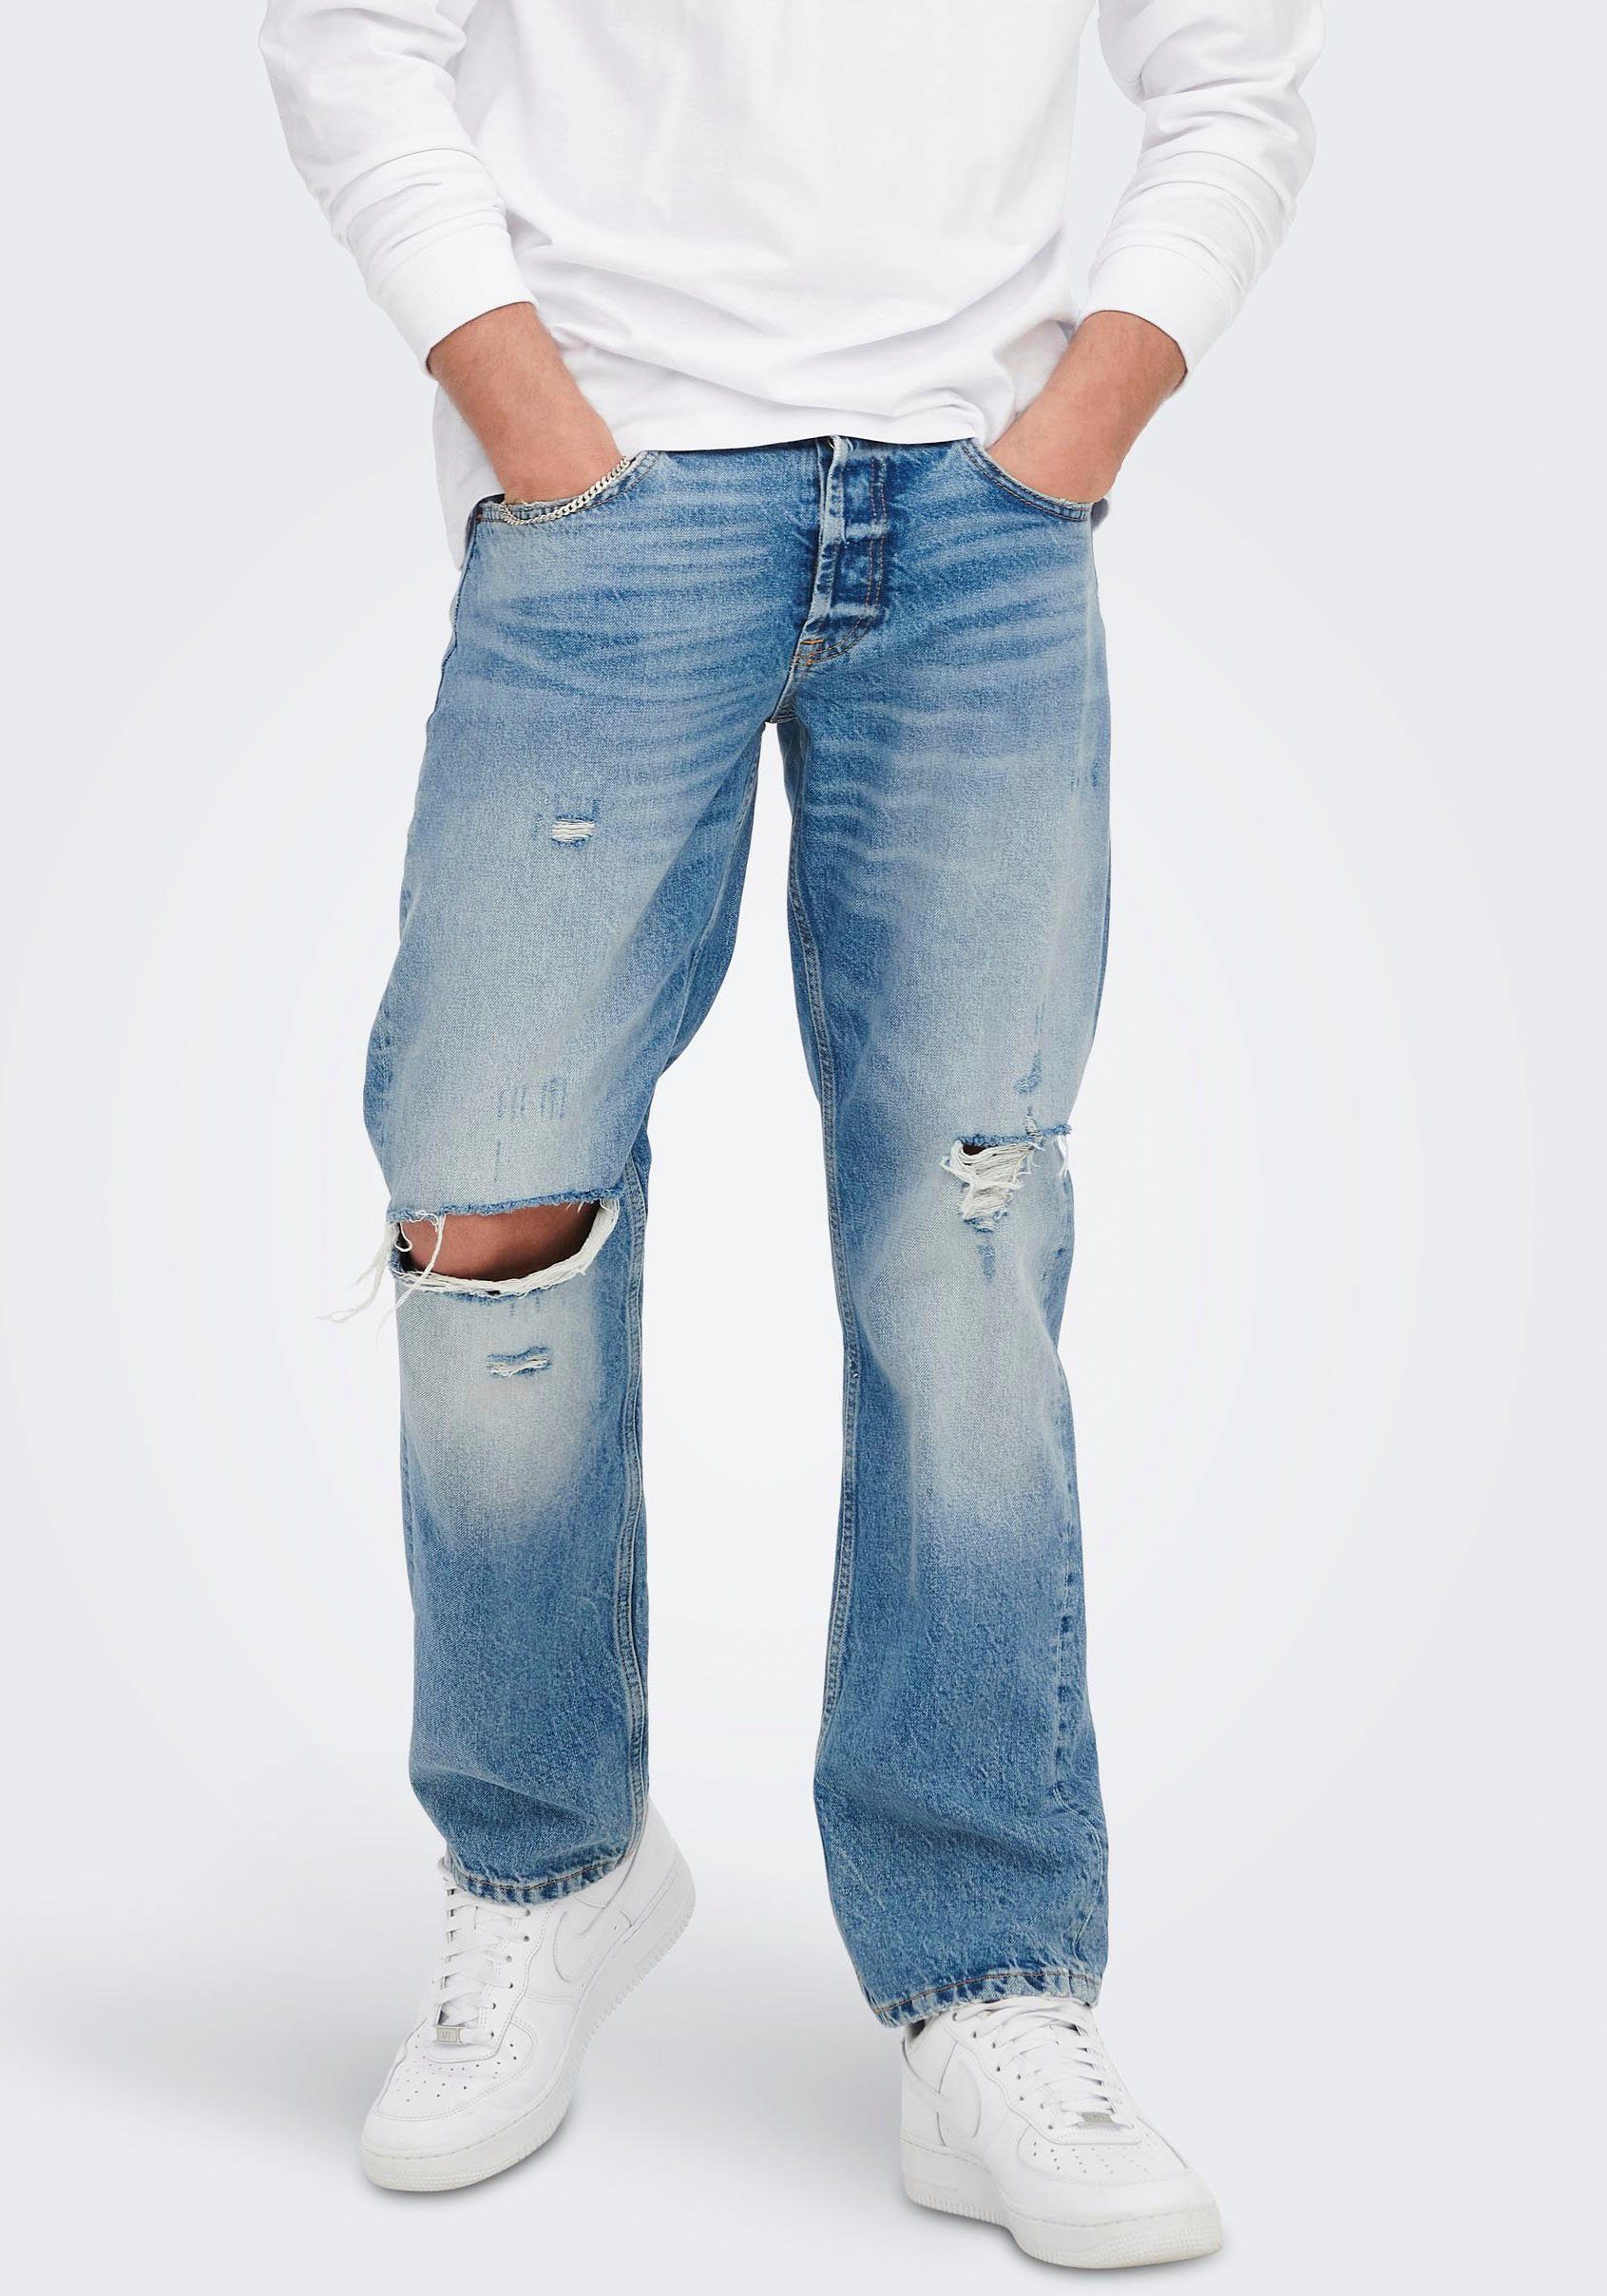 & ONLY LOOSE Loose-fit-Jeans ONSEDGE SONS